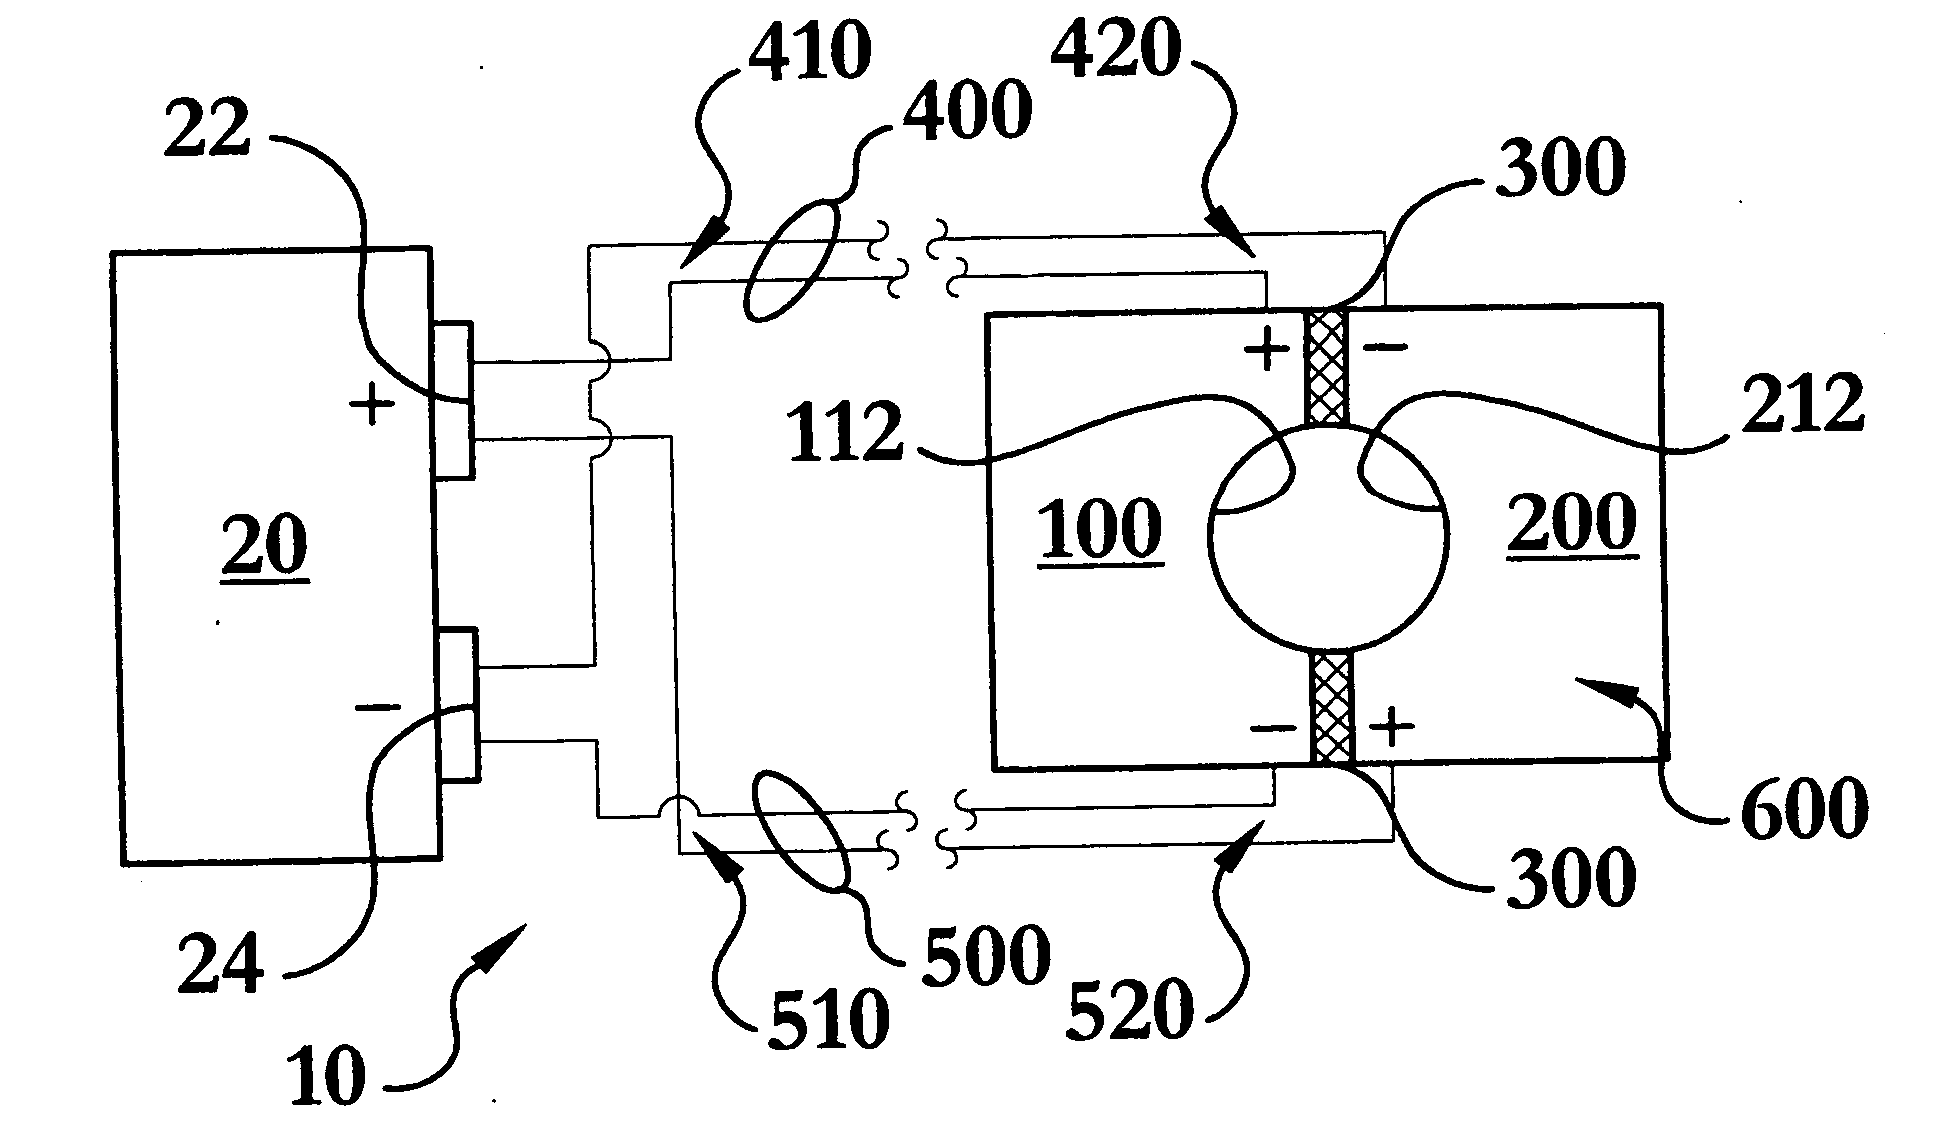 Opposed current flow magnetic pulse forming and joining system